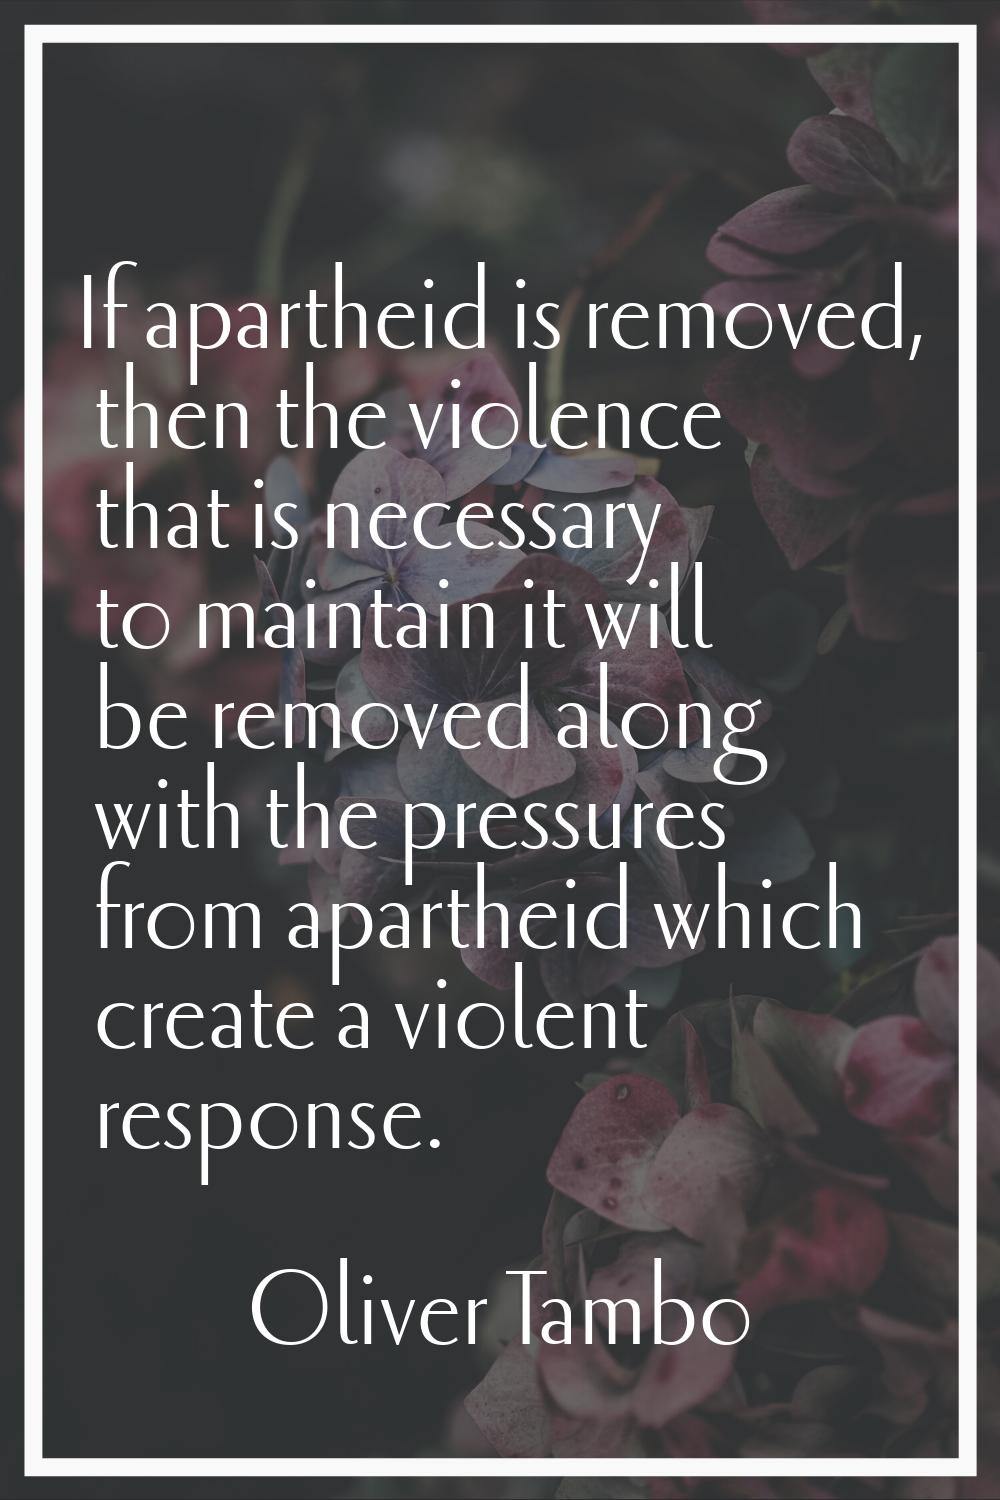 If apartheid is removed, then the violence that is necessary to maintain it will be removed along w